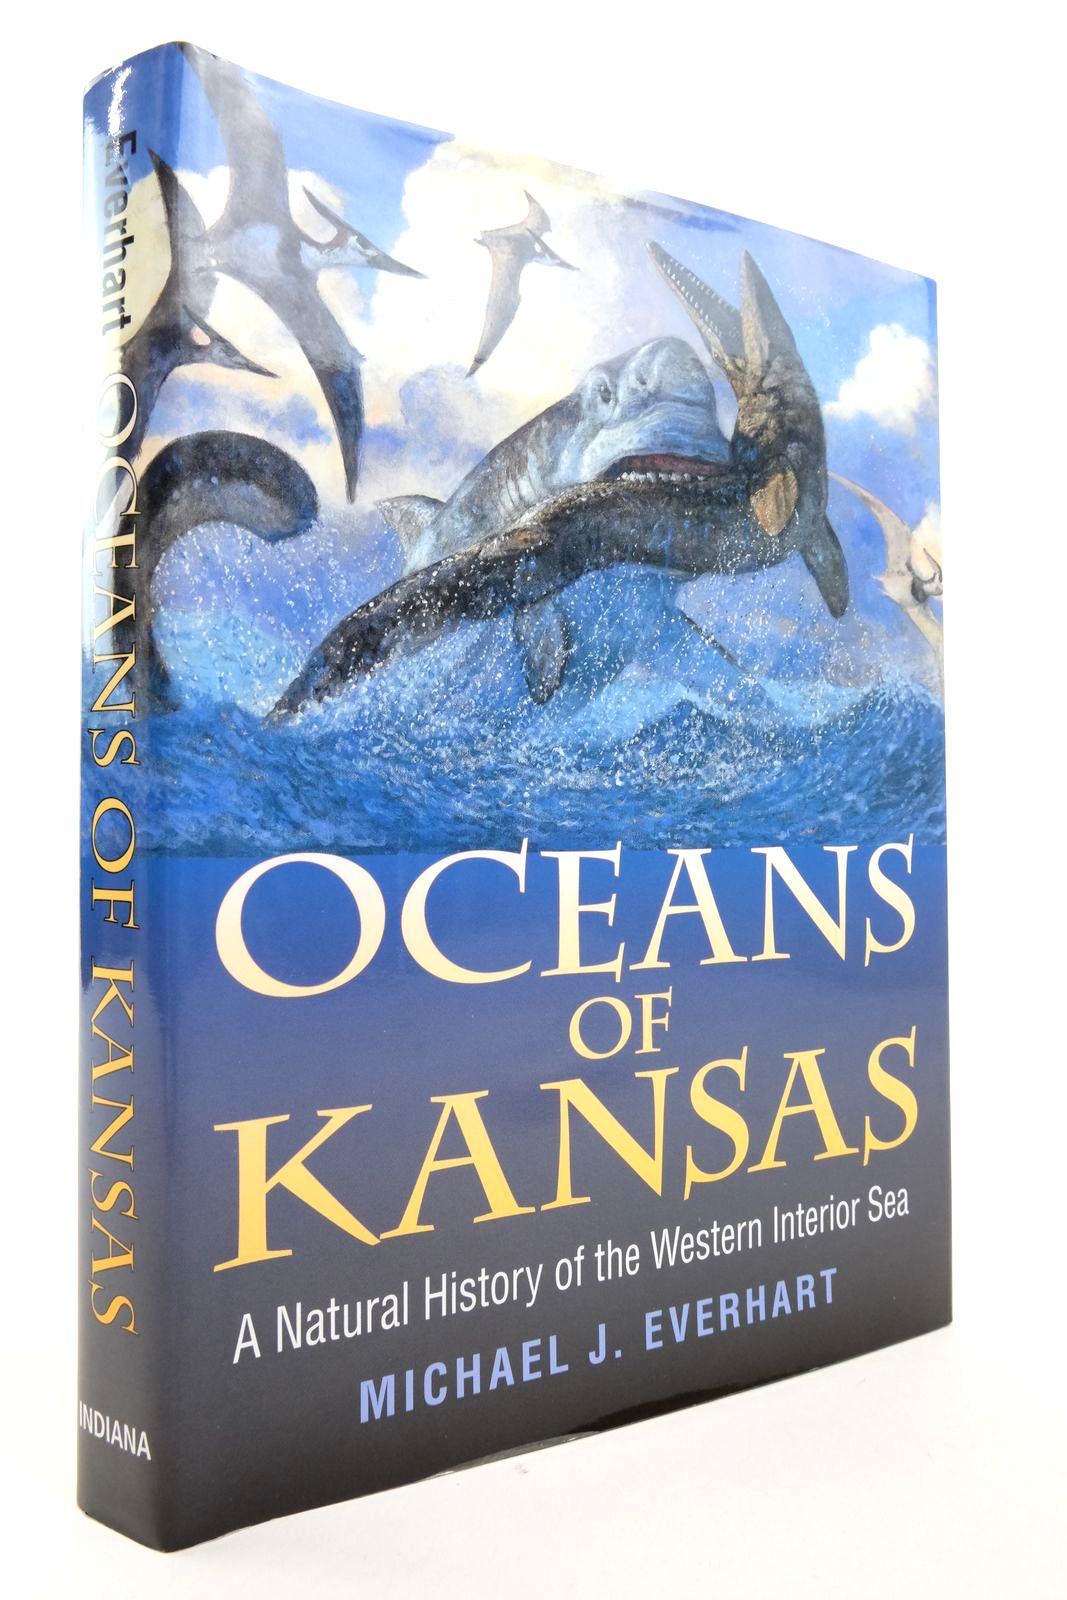 Photo of OCEANS OF KANSAS: A NATURAL HISTORY OF THE WESTERN INTERIOR SEA written by Everhart, Michael J. published by Indiana University Press (STOCK CODE: 2136662)  for sale by Stella & Rose's Books